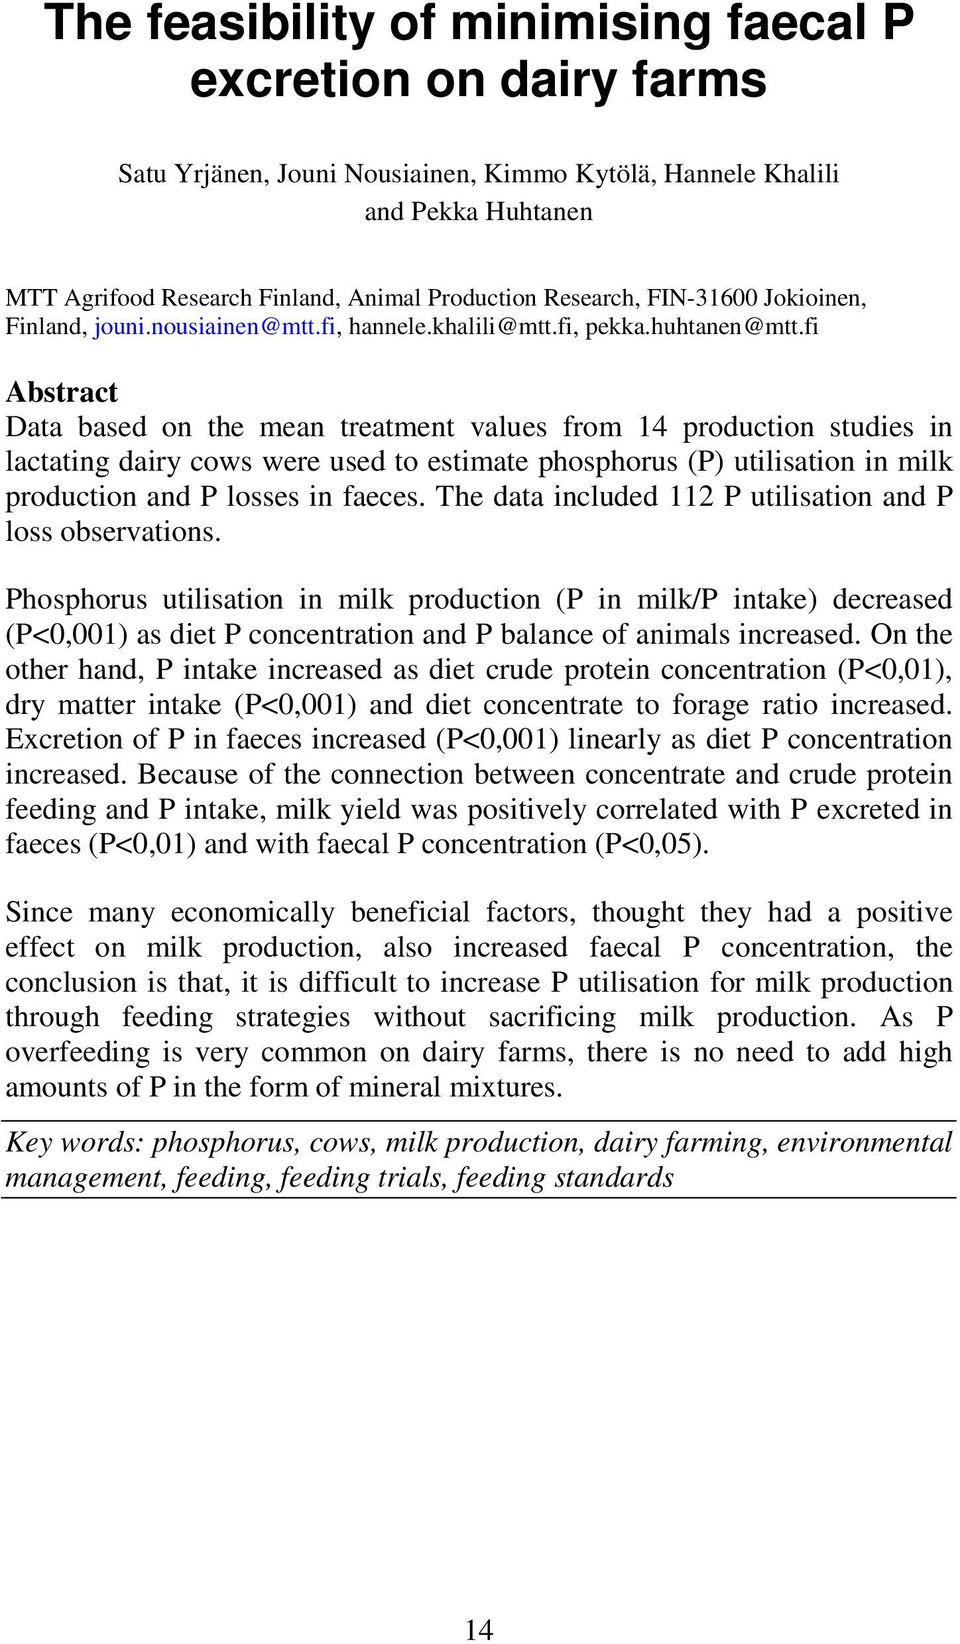 fi Abstract Data based on the mean treatment values from 14 production studies in lactating dairy cows were used to estimate phosphorus (P) utilisation in milk production and P losses in faeces.